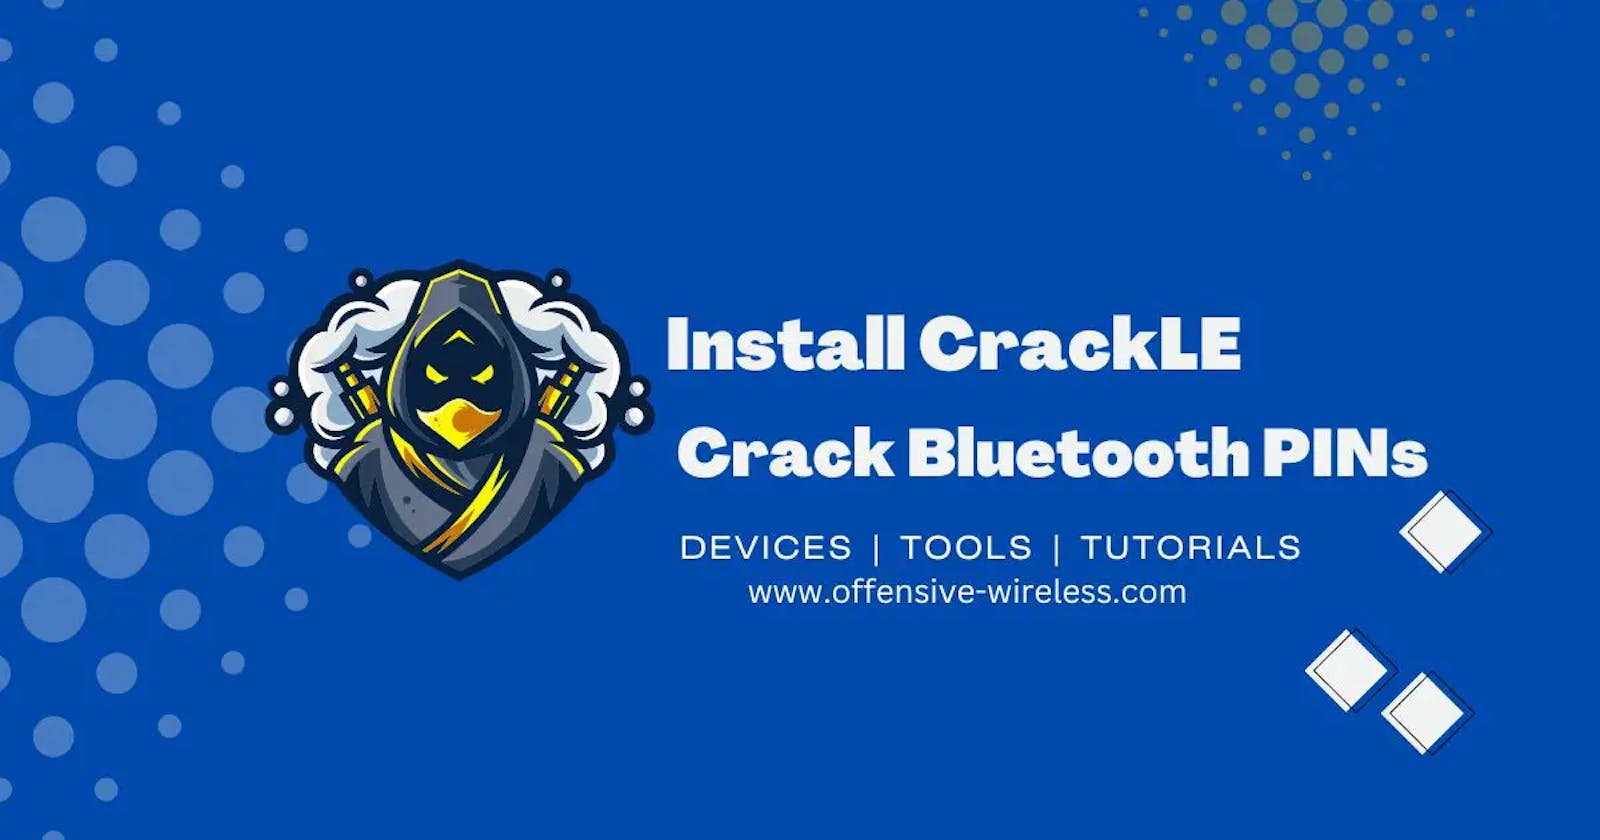 How to easy install CrackLE: Crack Bluetooth PINs